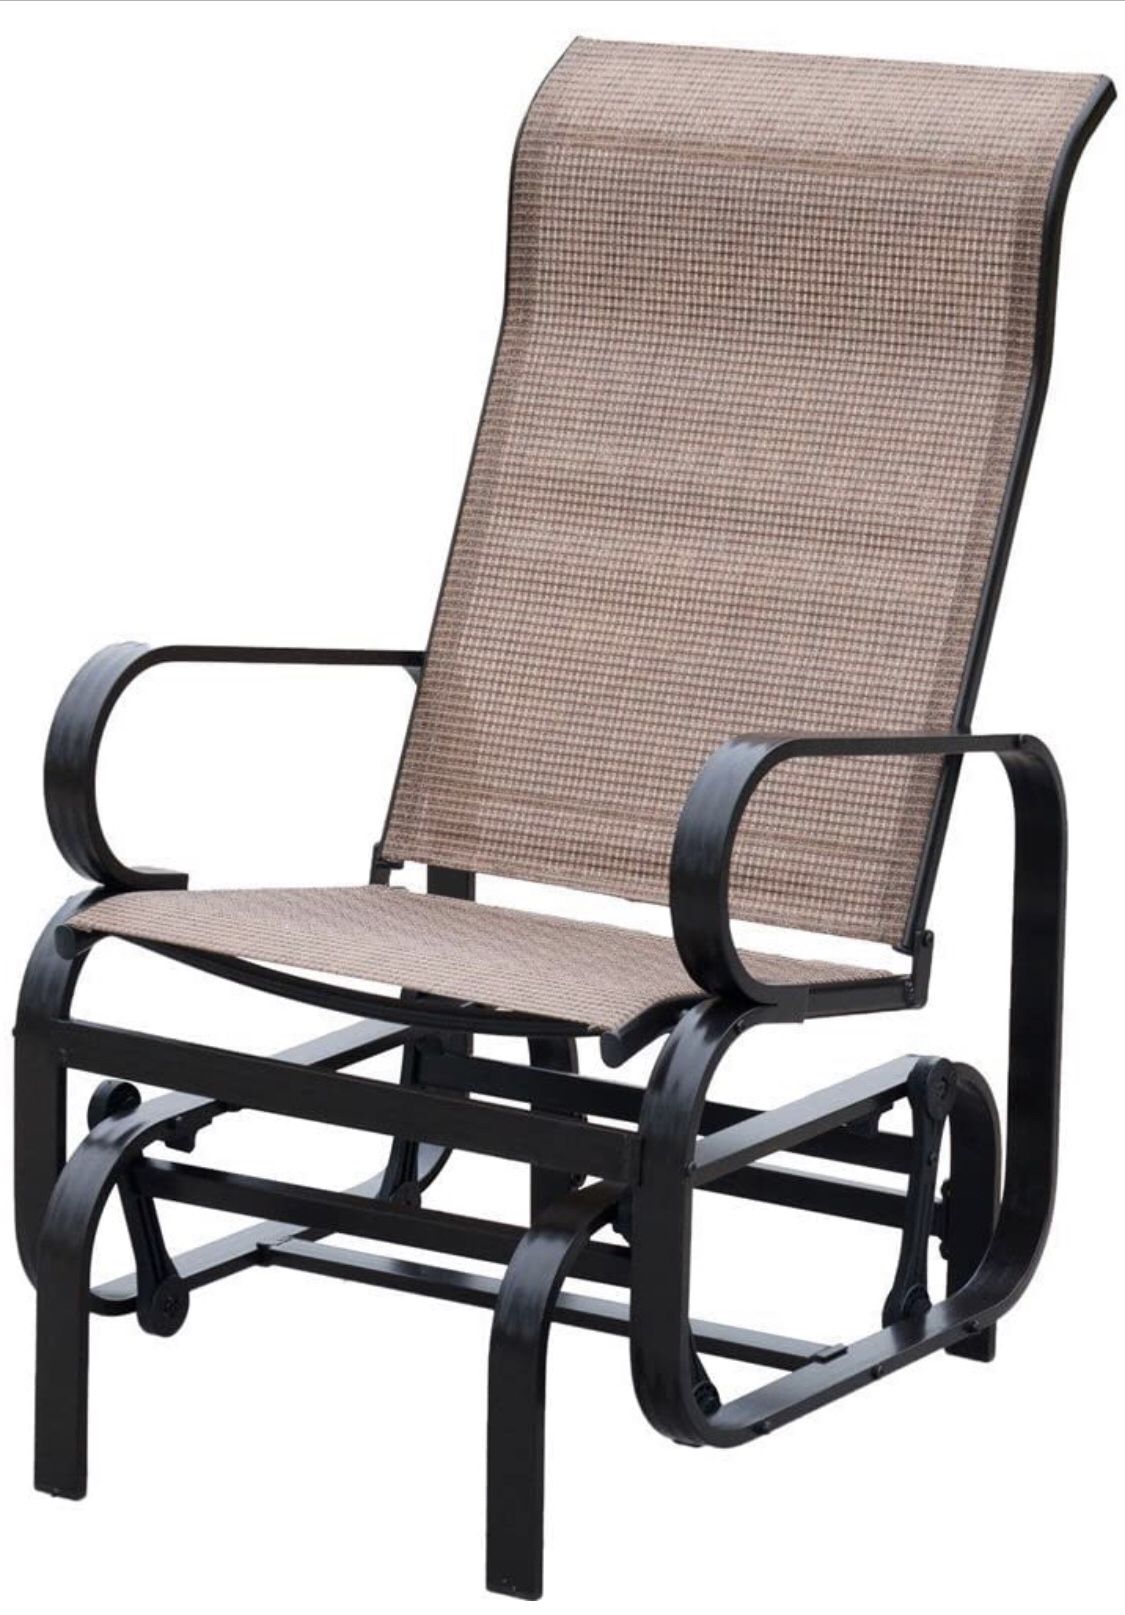 PatioPost Outdoor Porch Glider Patio Swing Rocking Lounge Chair with Breathable Textilene Fabric Powder Coated Sturdy Aluminum Frame Support 350lbs fo